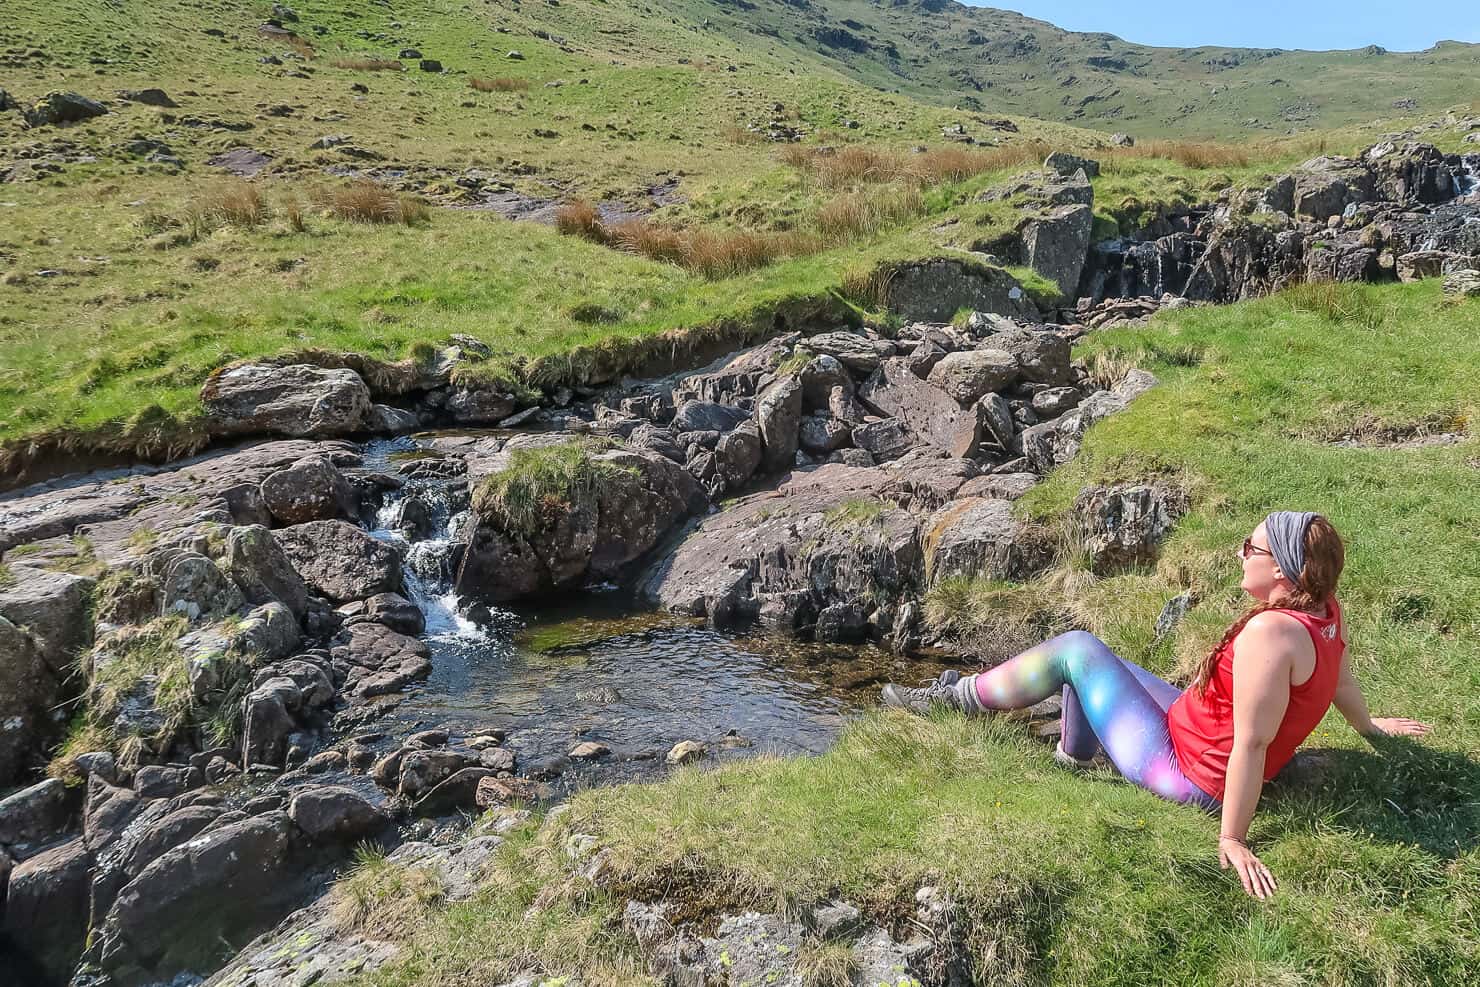 Helen in Wonderlust by a natural stream in the Lake District.